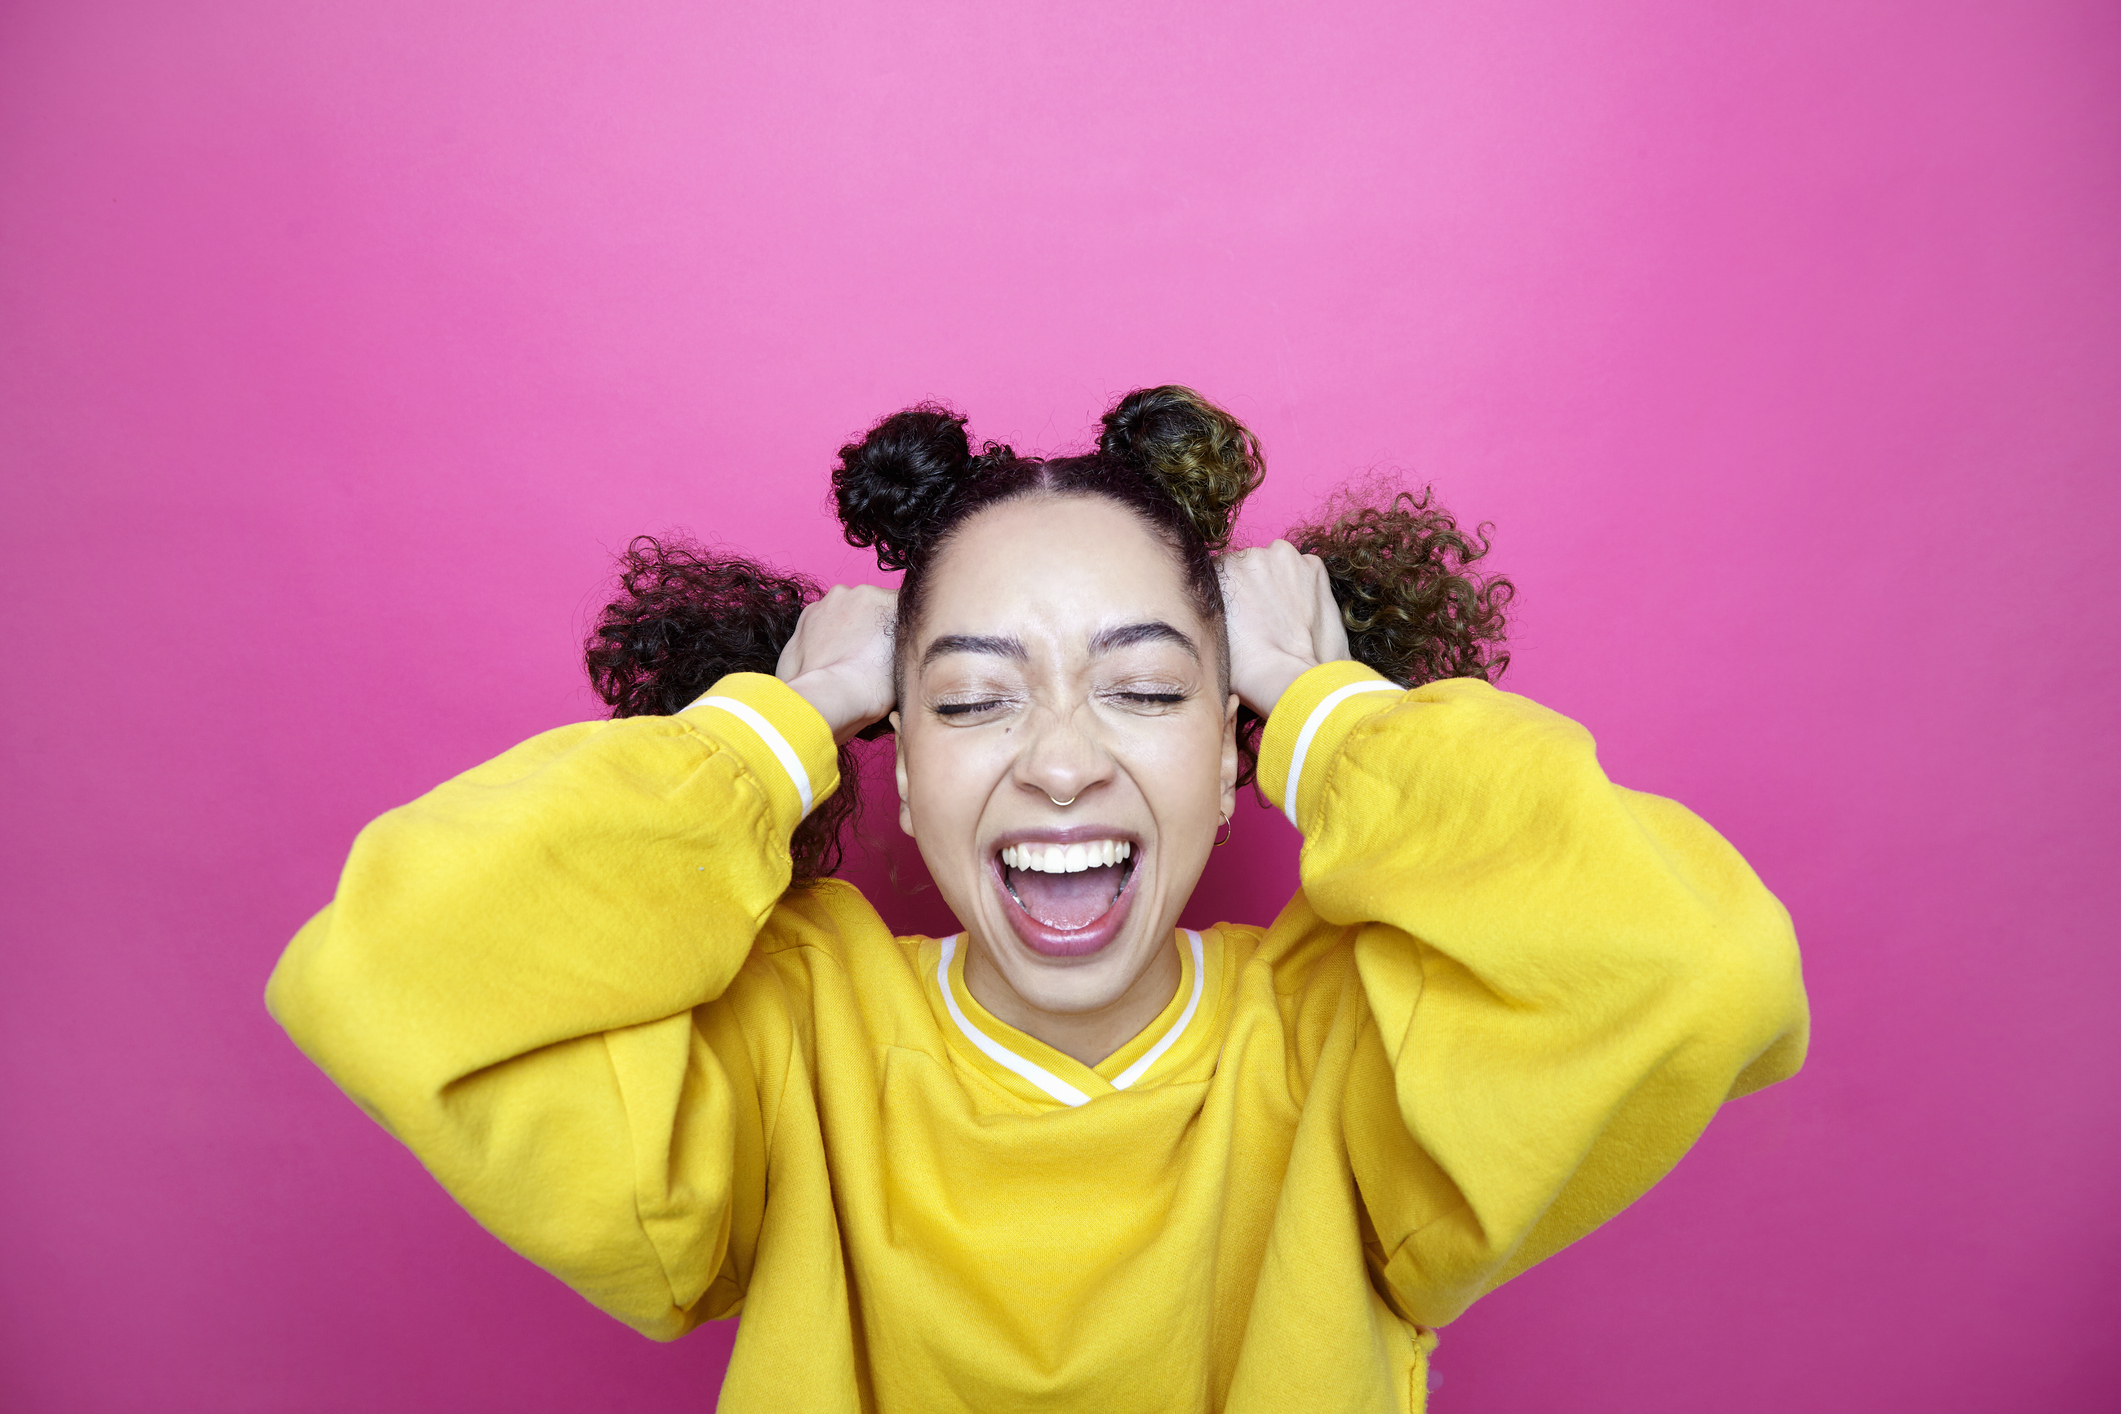 Woman with hair in buns, yellow top, laughing with hands on head against pink background